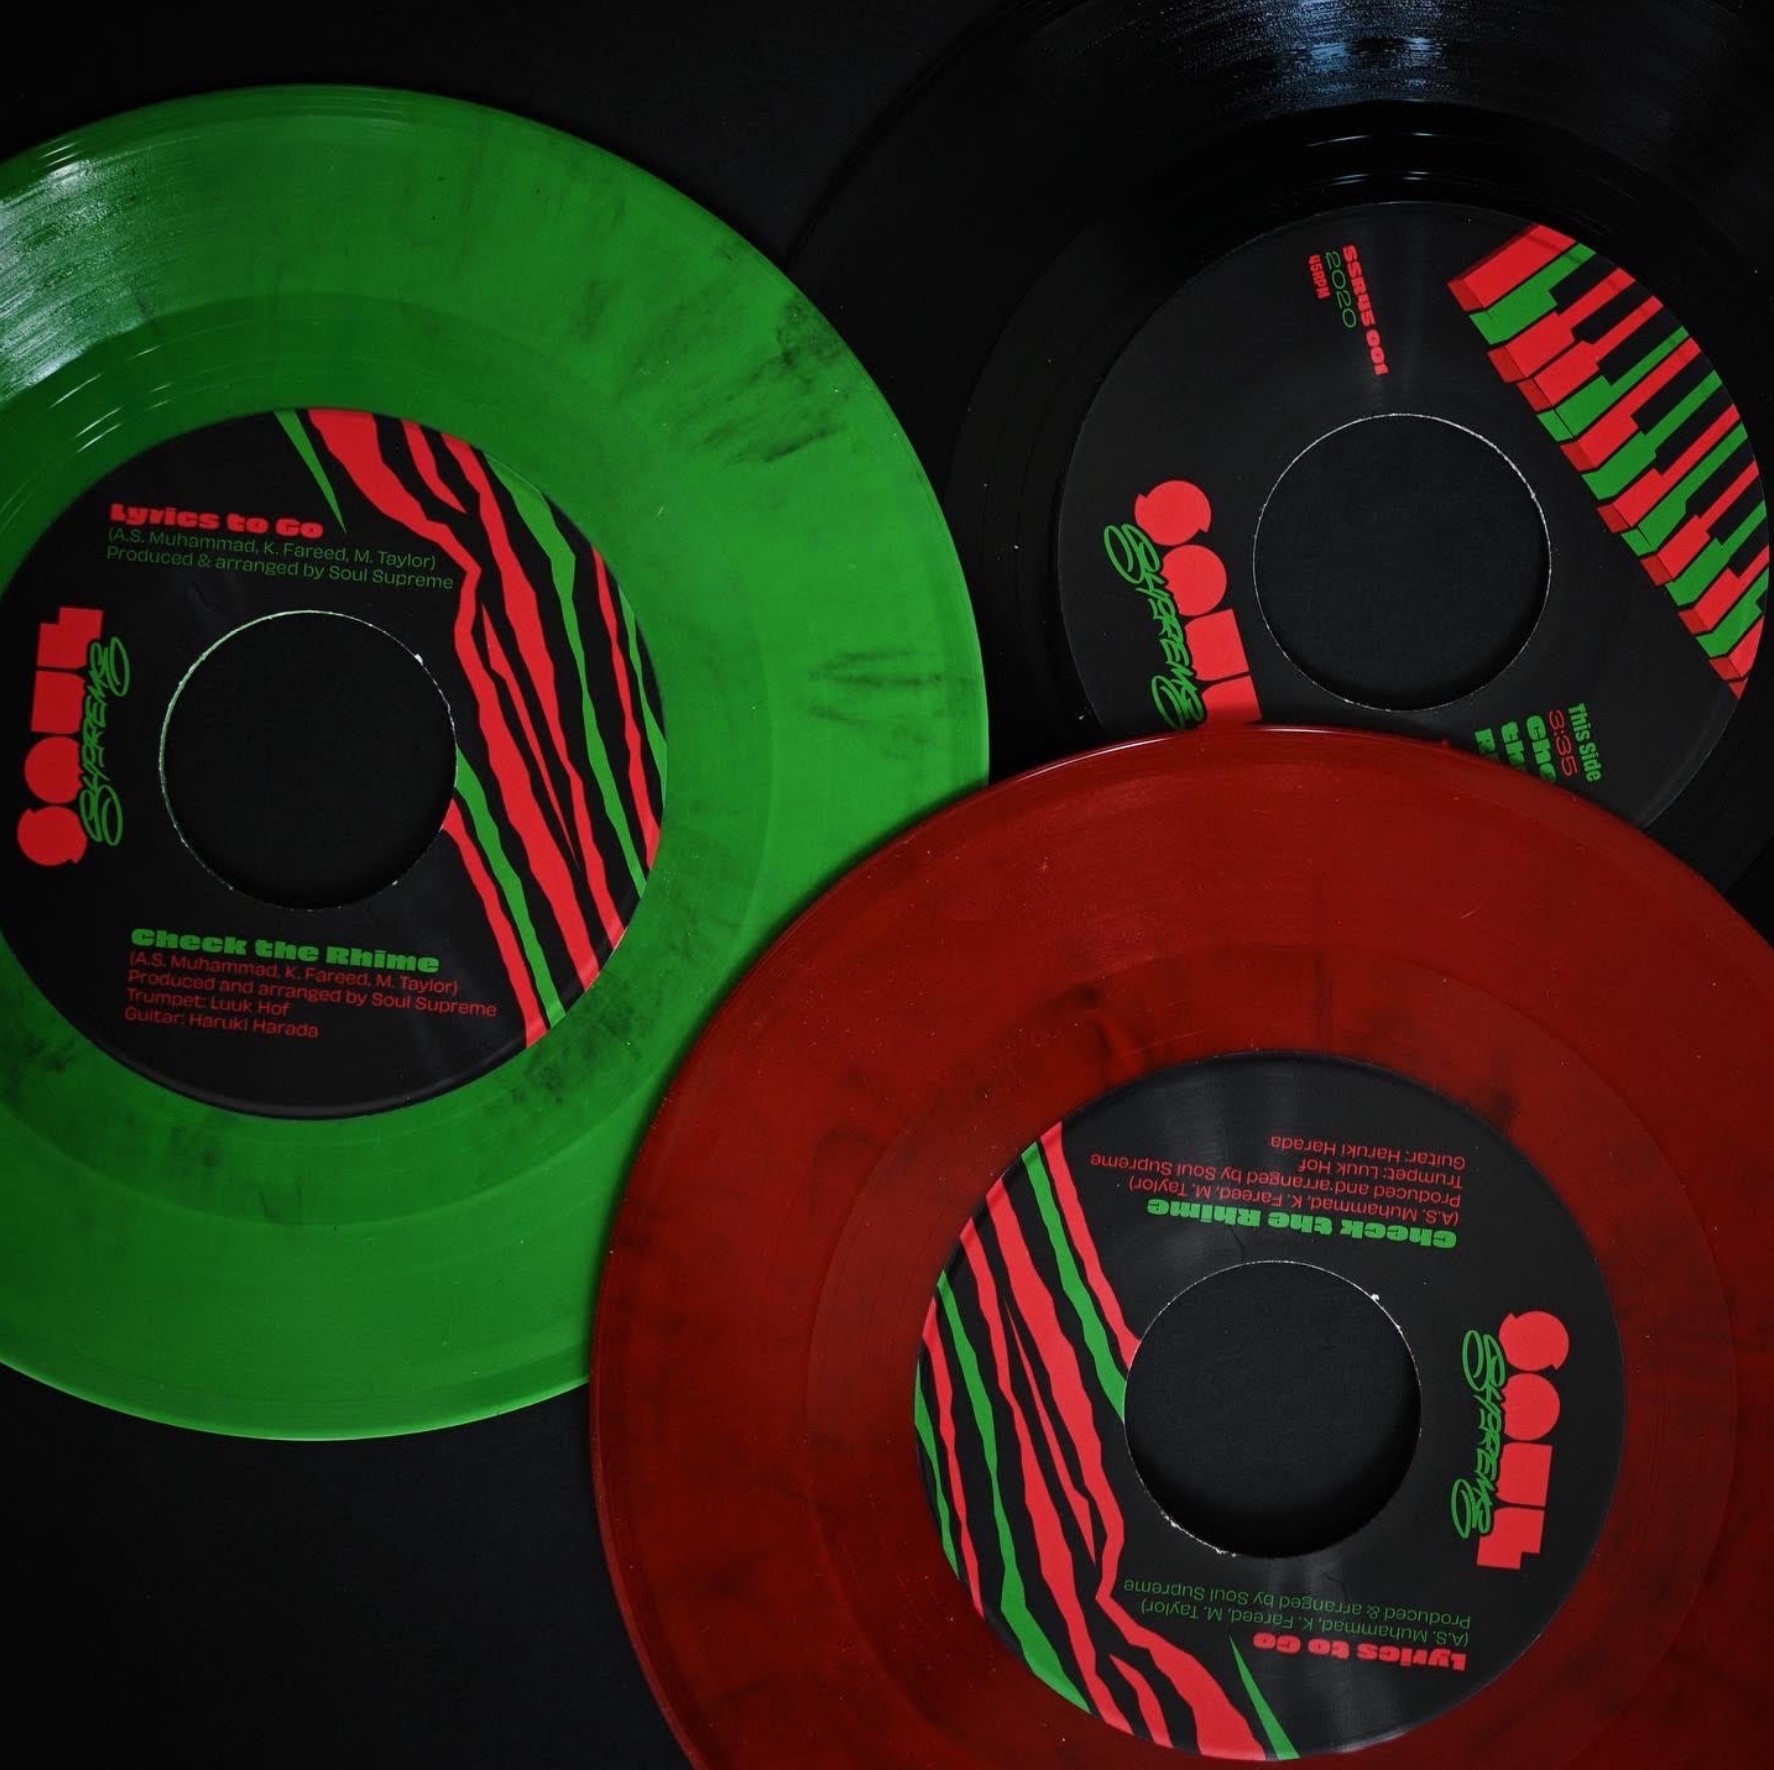 Soul Supreme’s Tribute to A Tribe Called Quest (‘Check The Rhime’ b/w ‘Lyrics To Go’ 45)